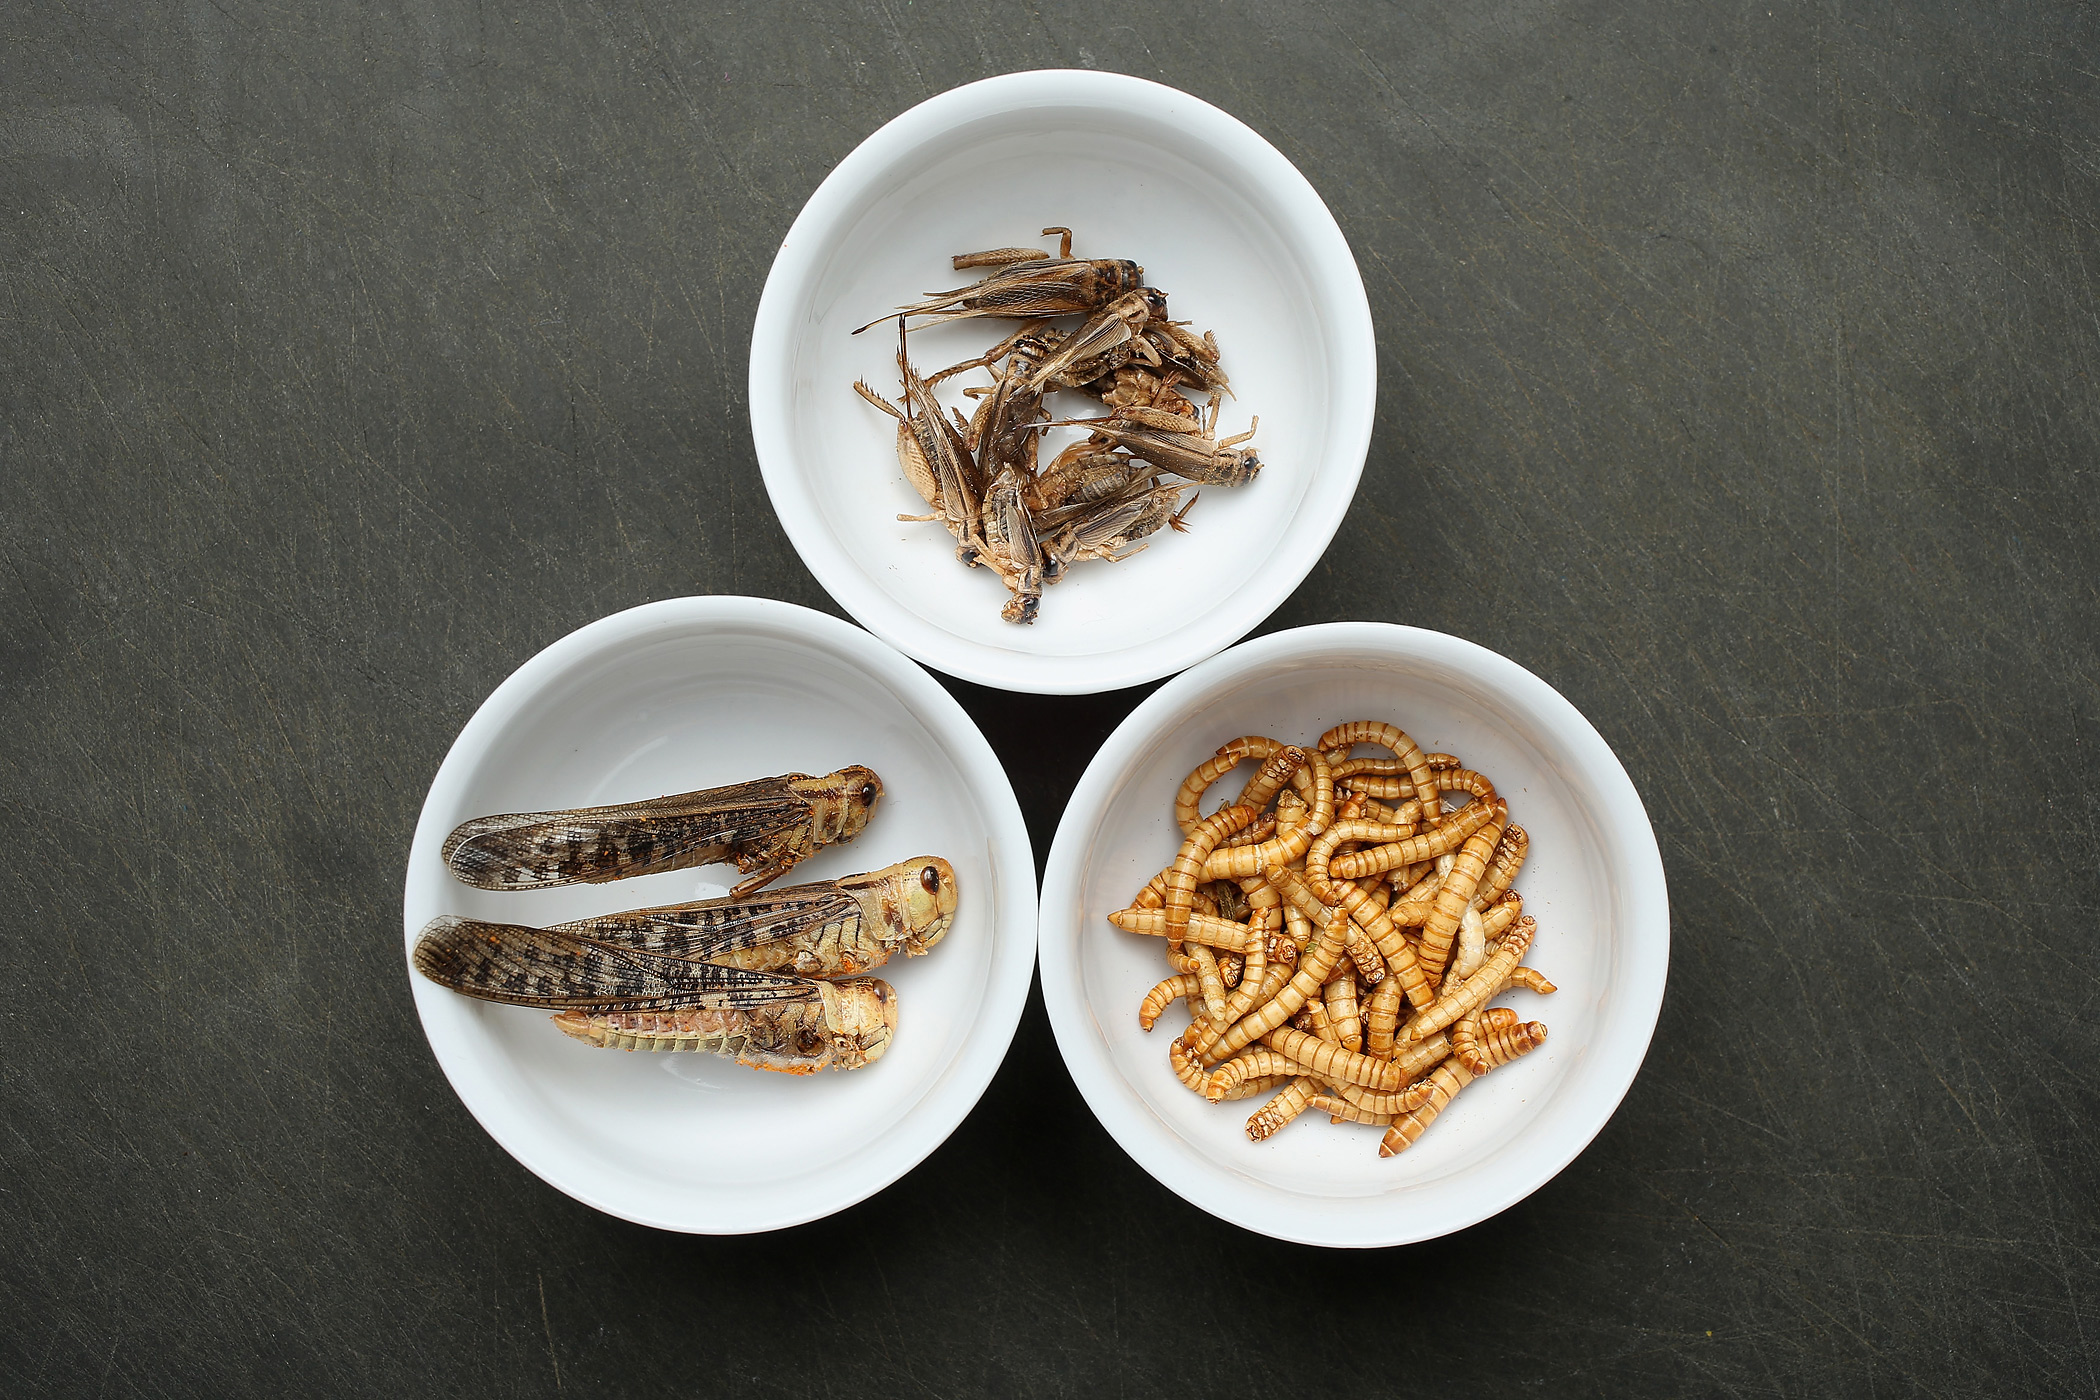 Dried grasshoppers, mealworms and crickets seasoned with spices (Sean Gallup—Getty Images)